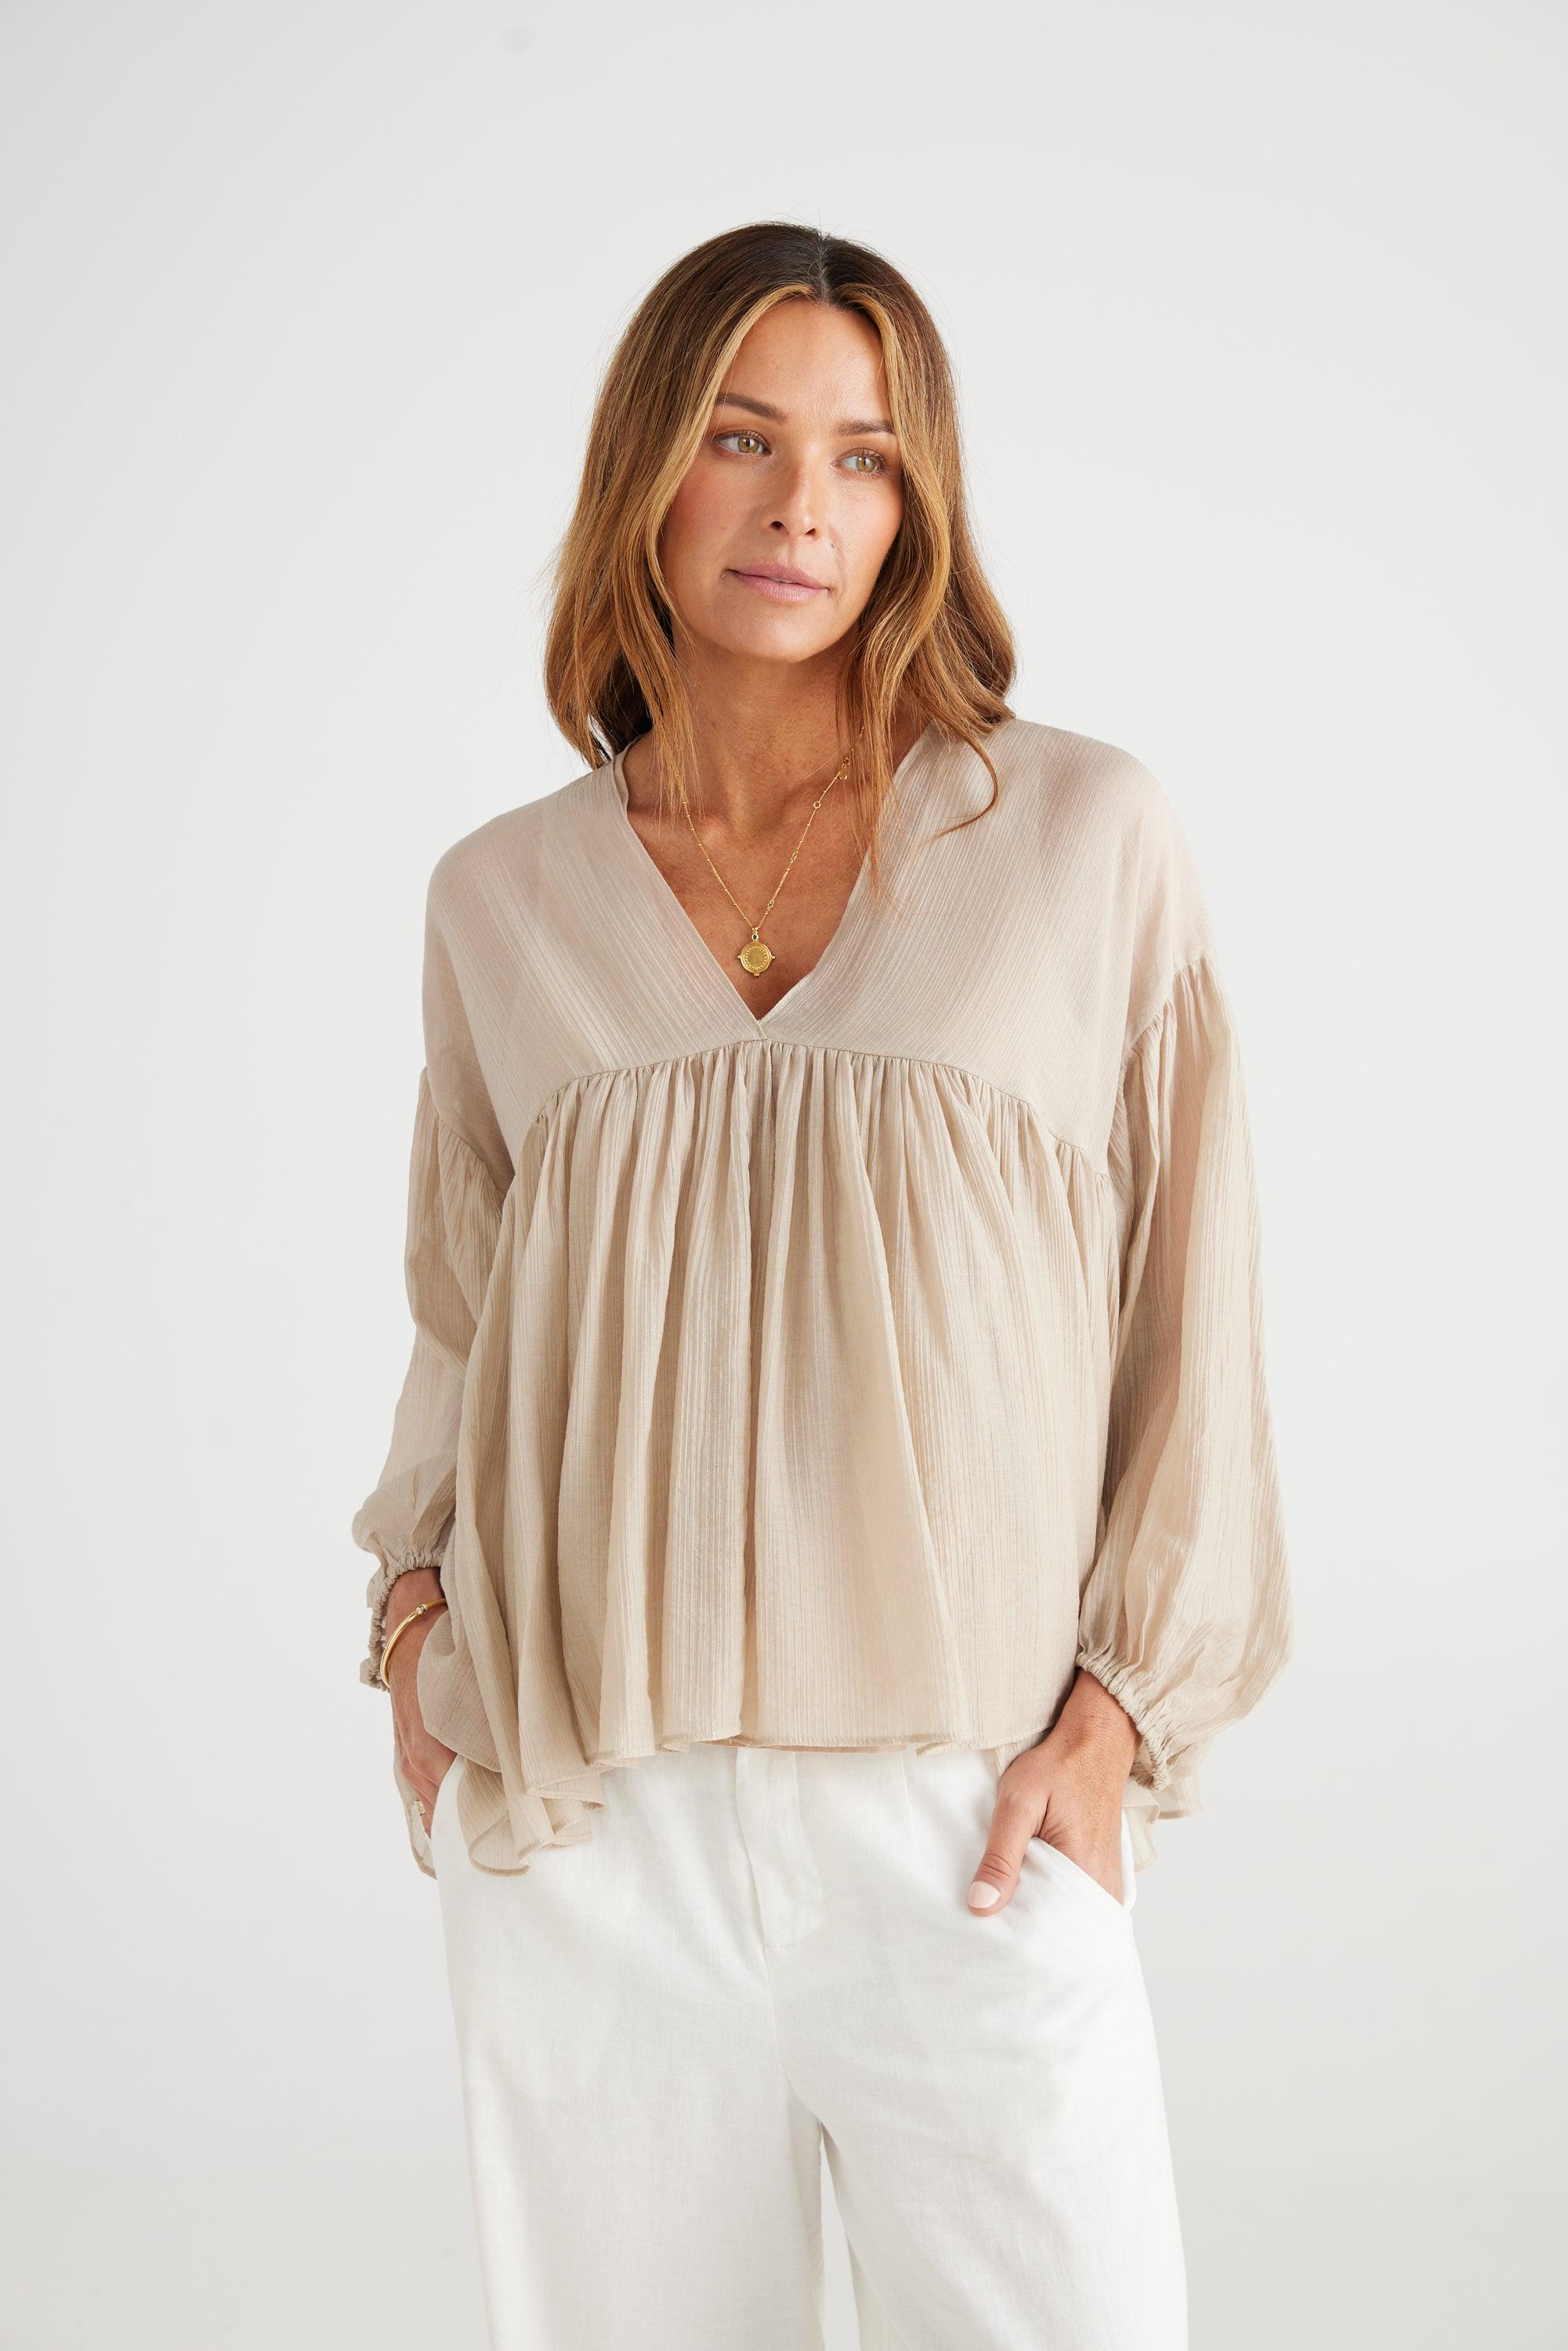 Dahla Top - Oyster-Tops-Brave & True-The Bay Room